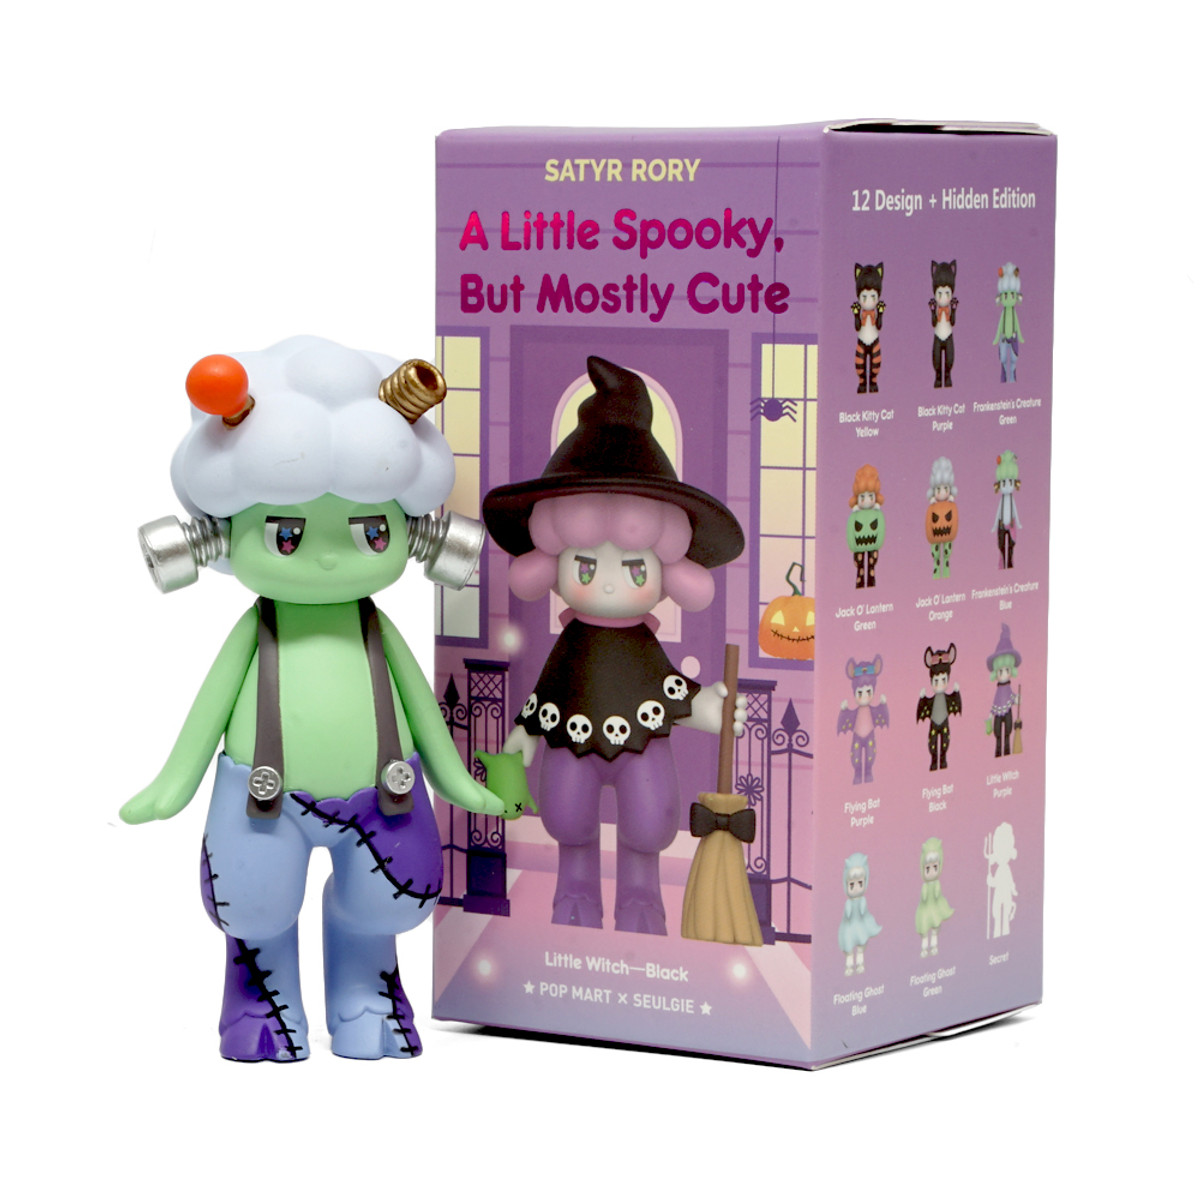 Satyr Rory A Little Spooky, But Mostly Cute Mini Series by Seulgie Blind Box